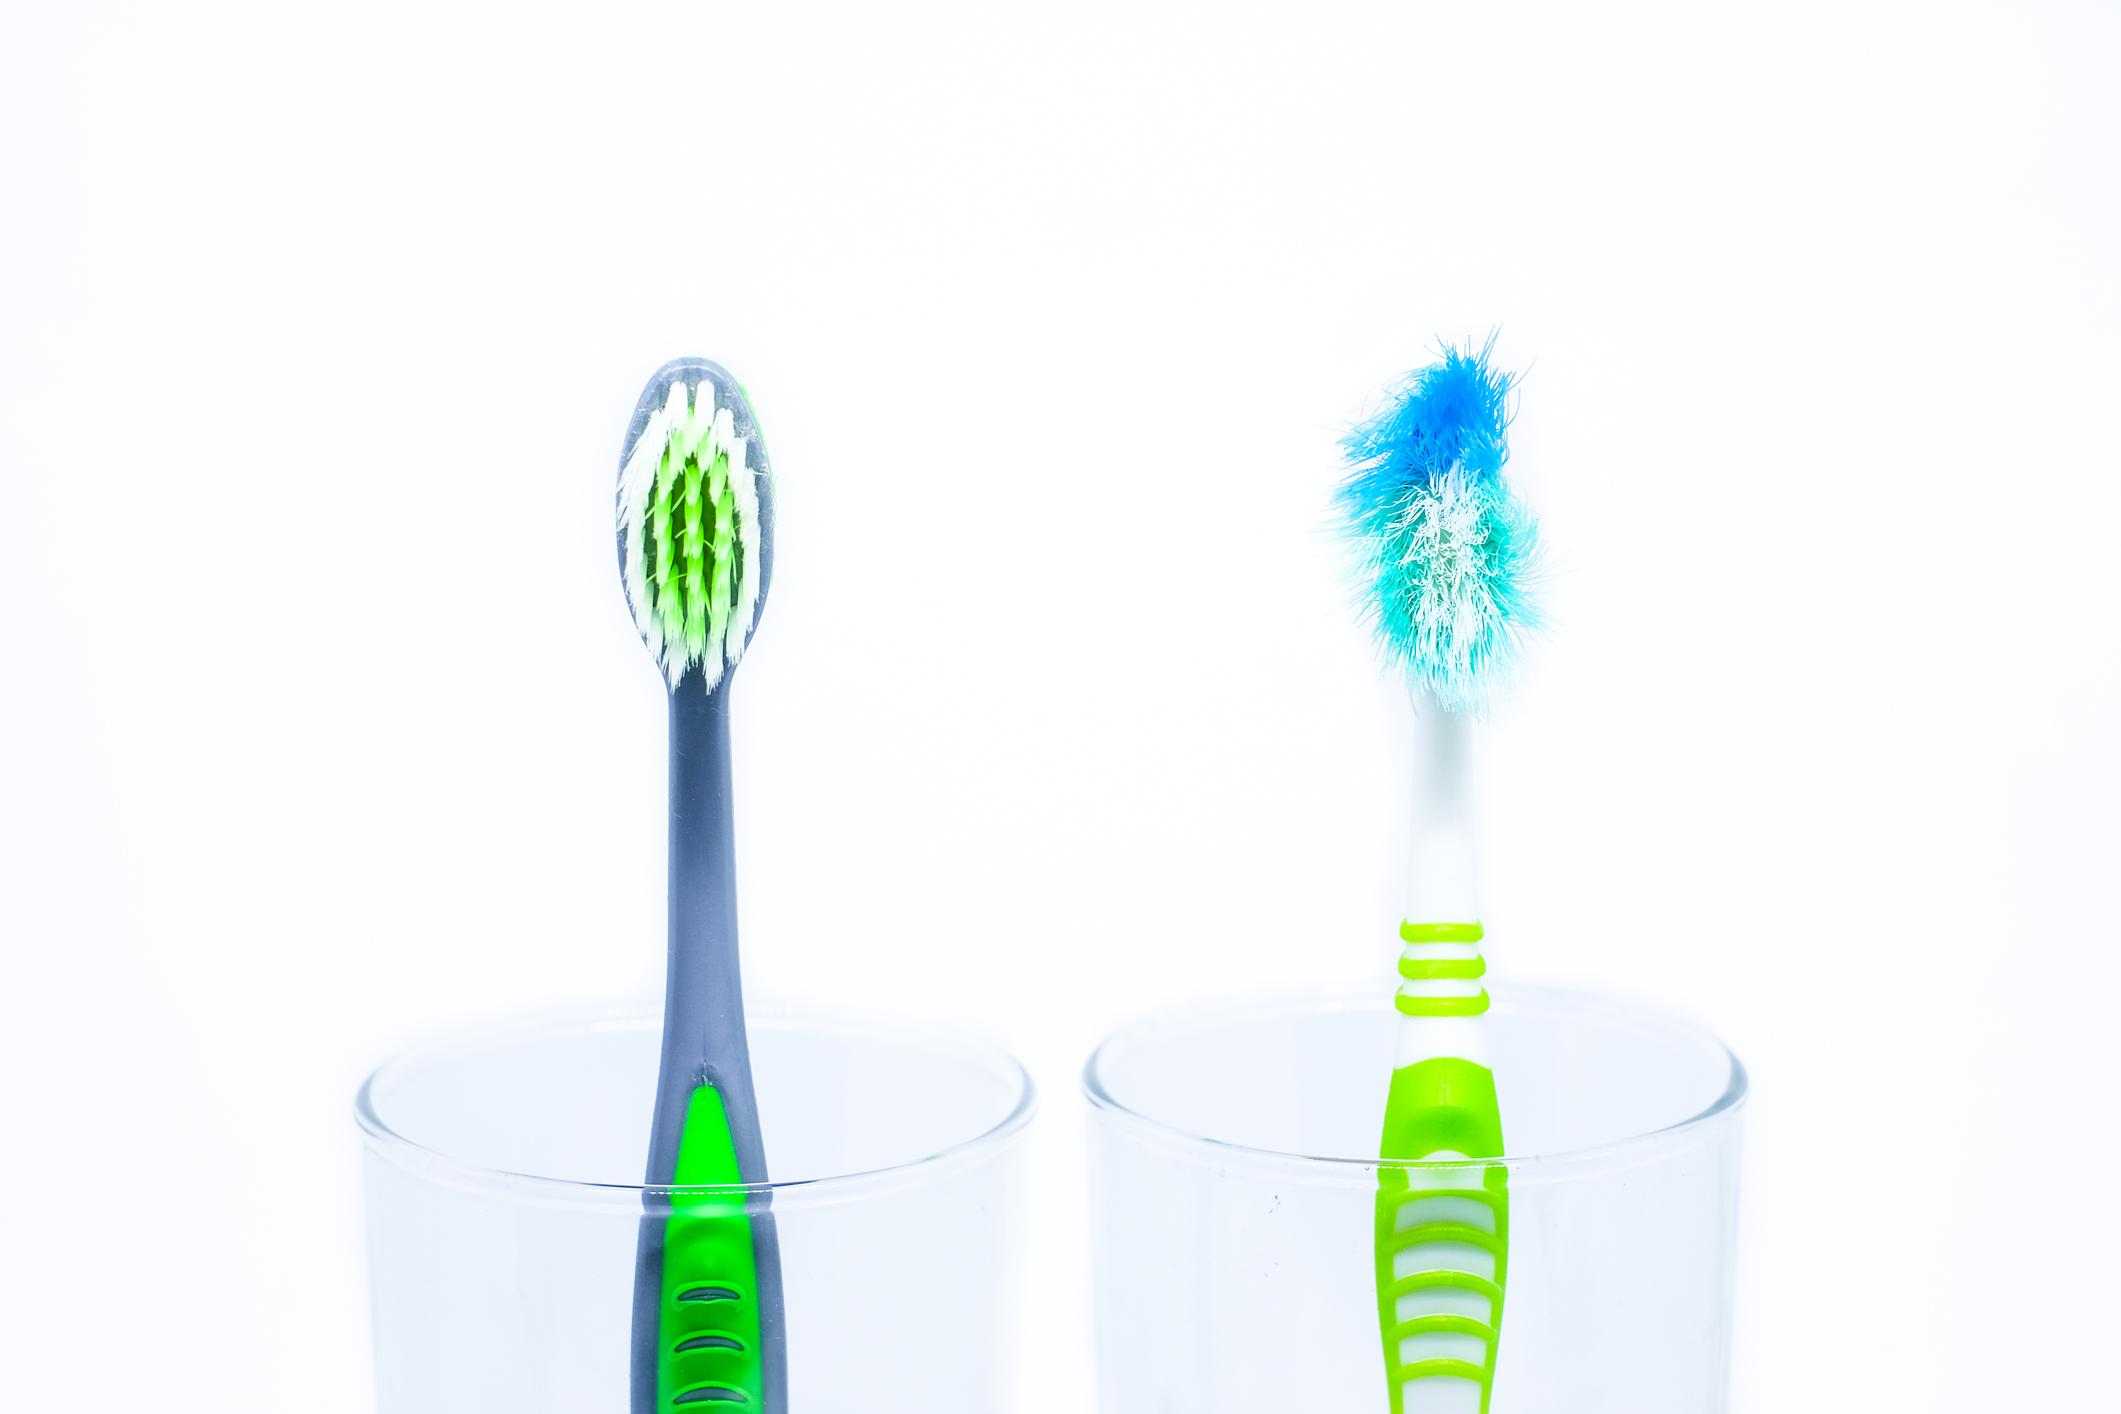 Photograph of two green and blue tooth brushes. One is worn out and the other is new and in good condition.